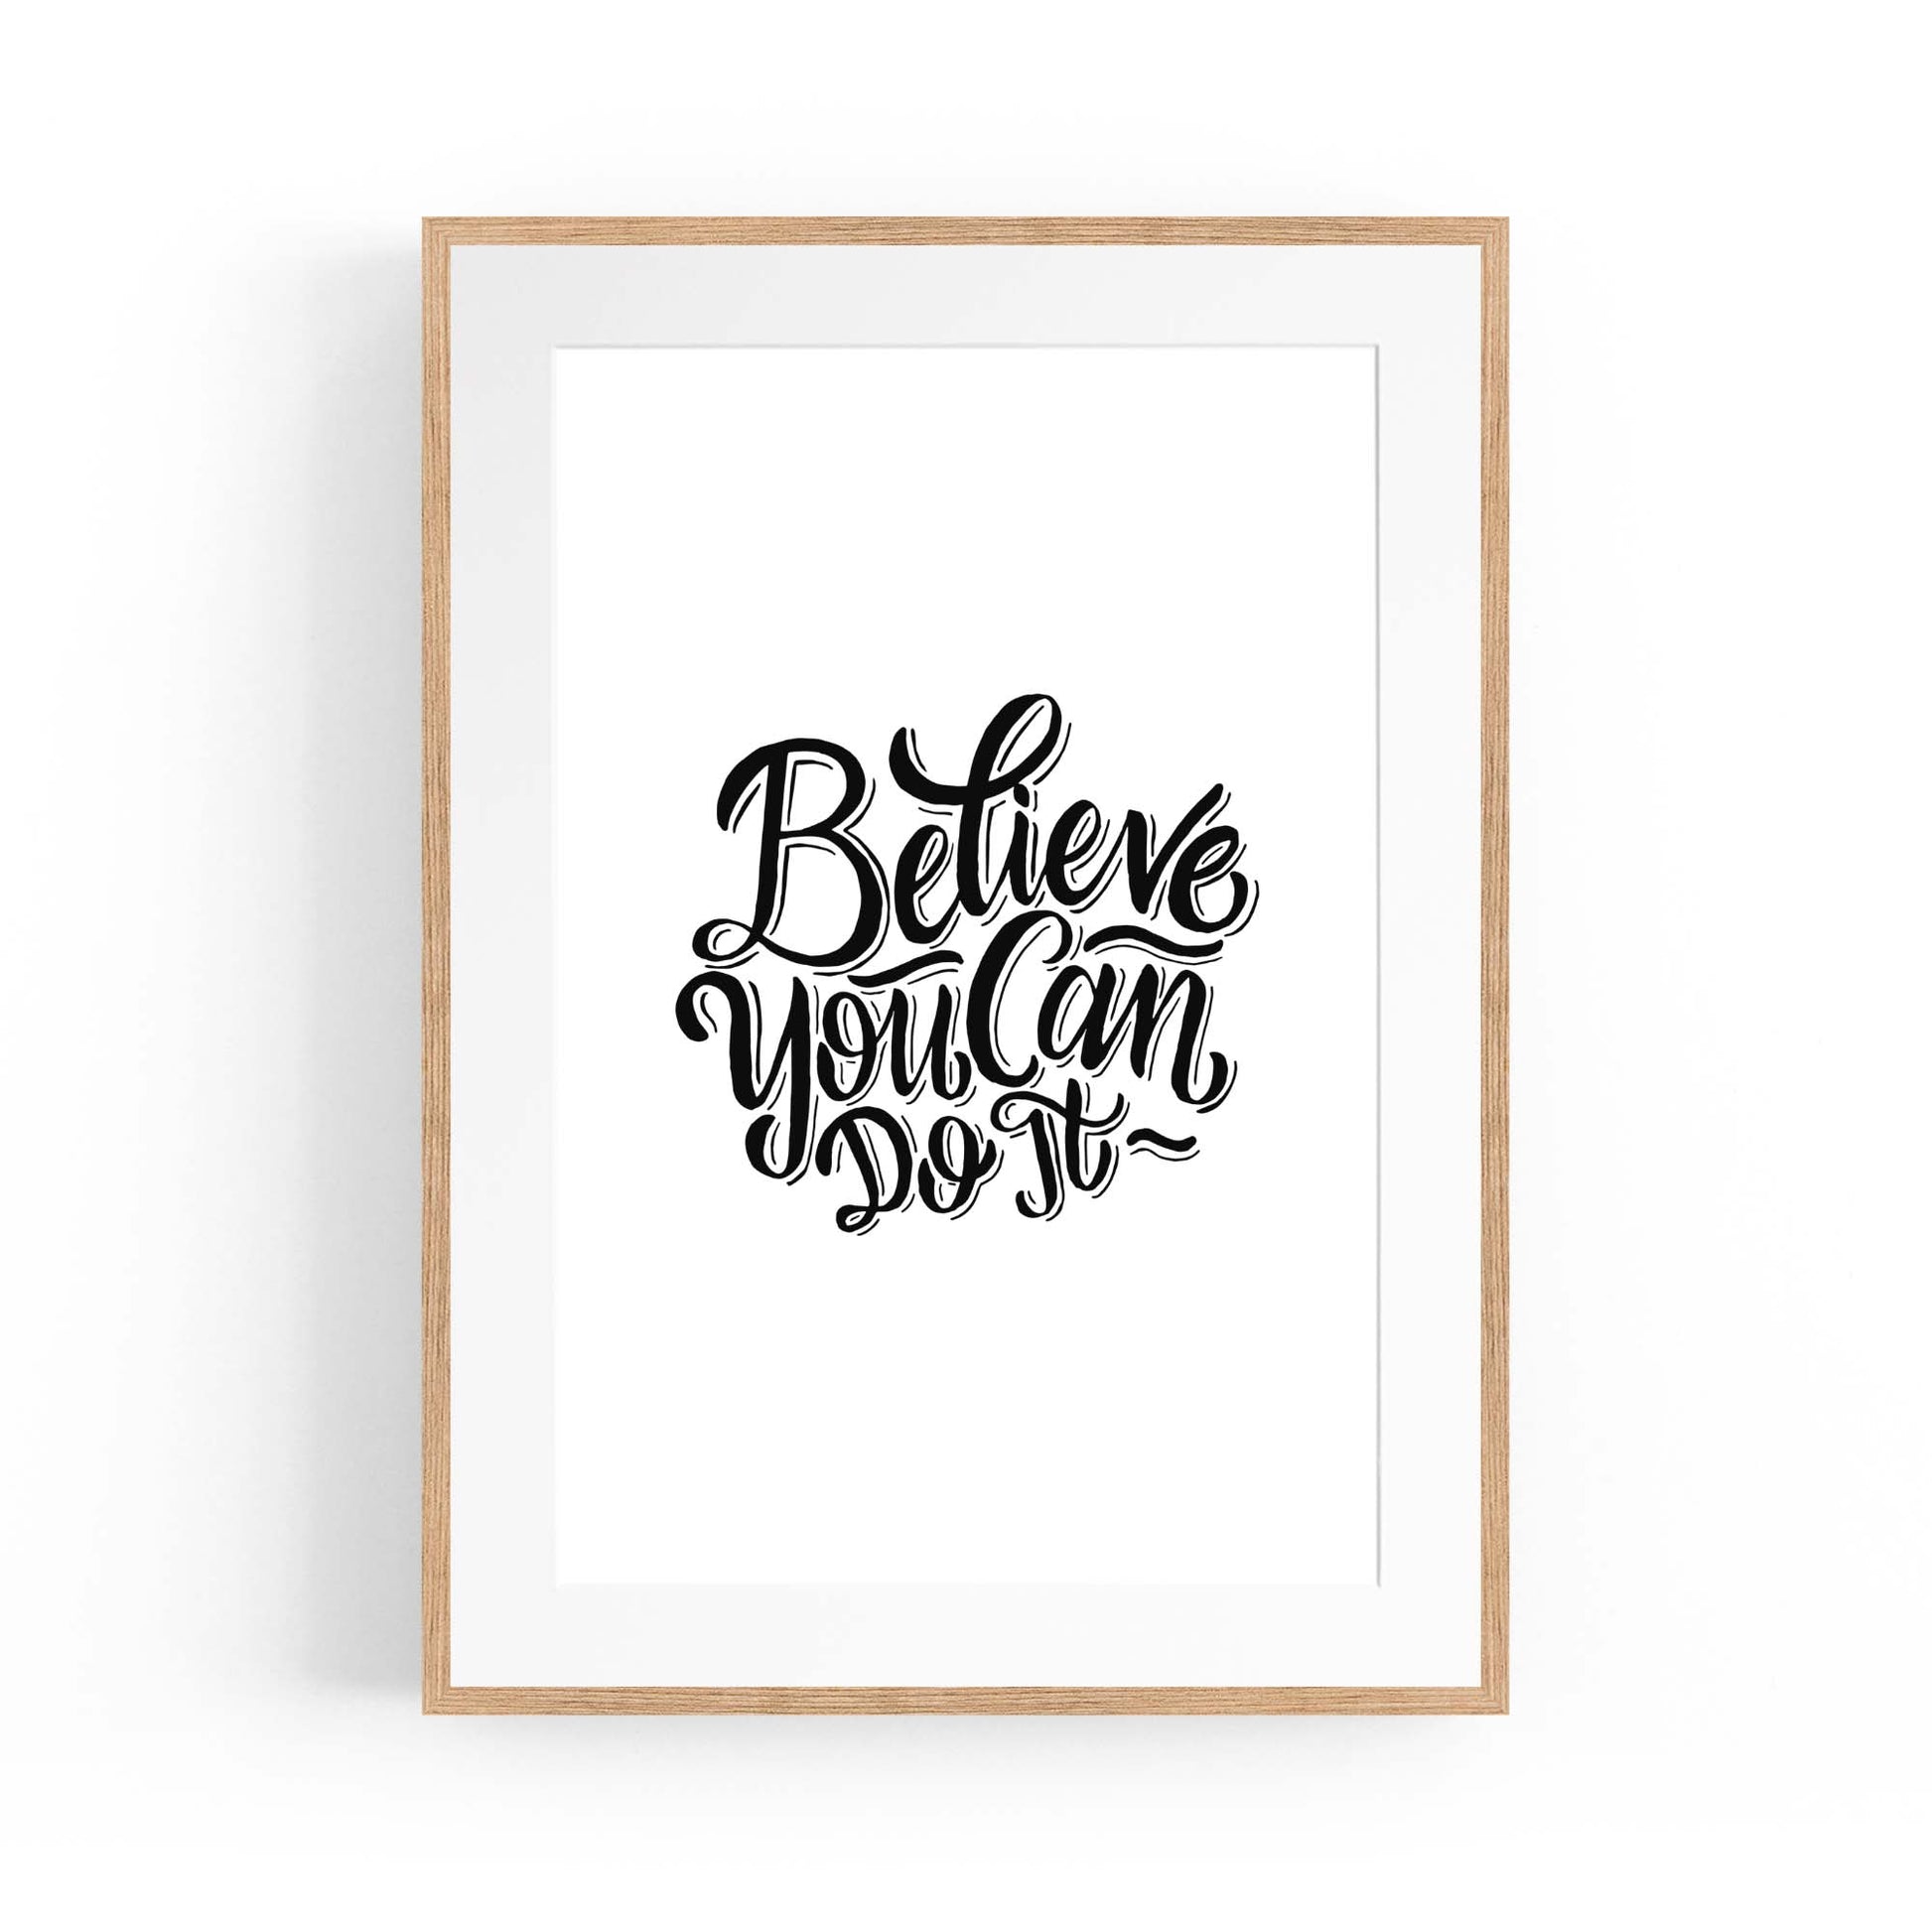 "Believe You Can Do It" Motivational Quote Wall Art - The Affordable Art Company